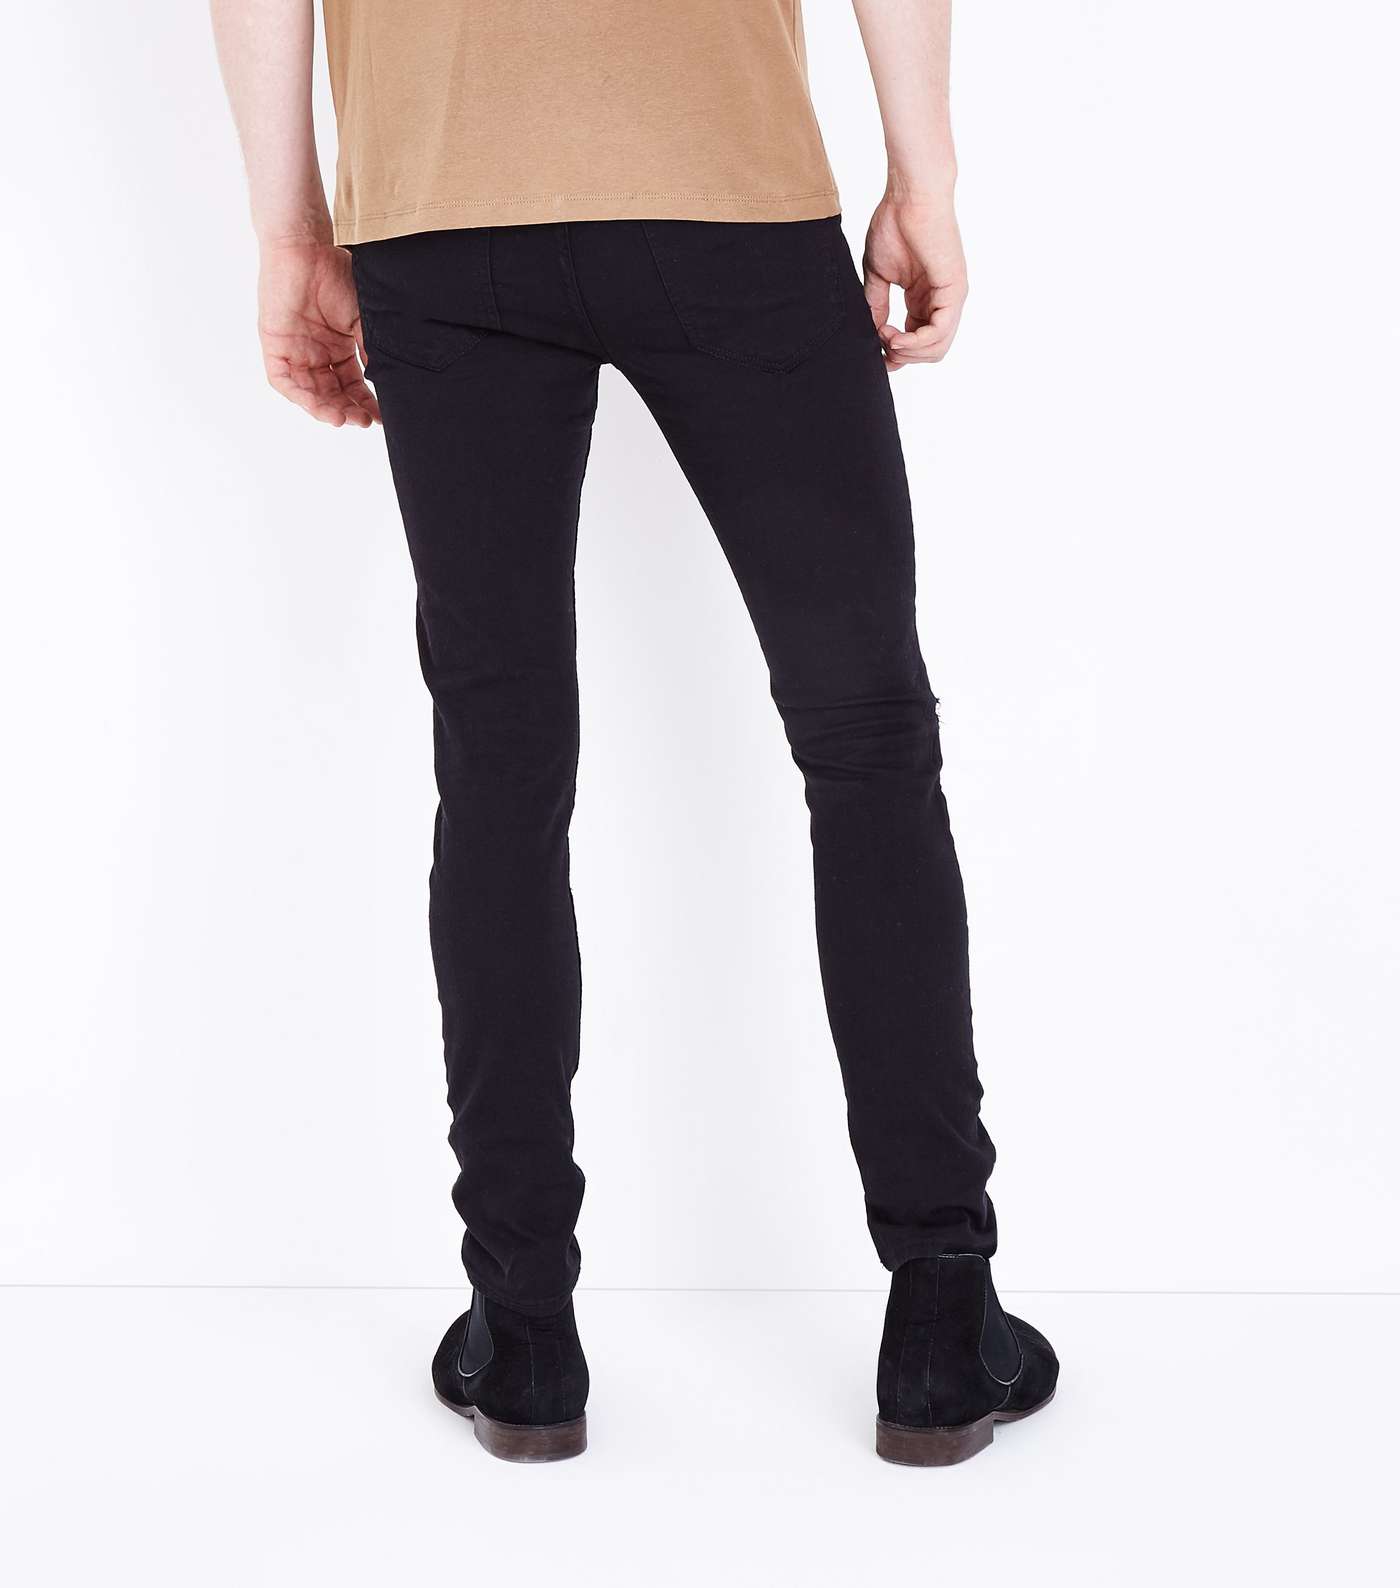 Black Ripped Knee Stretch Skinny Jeans Image 3